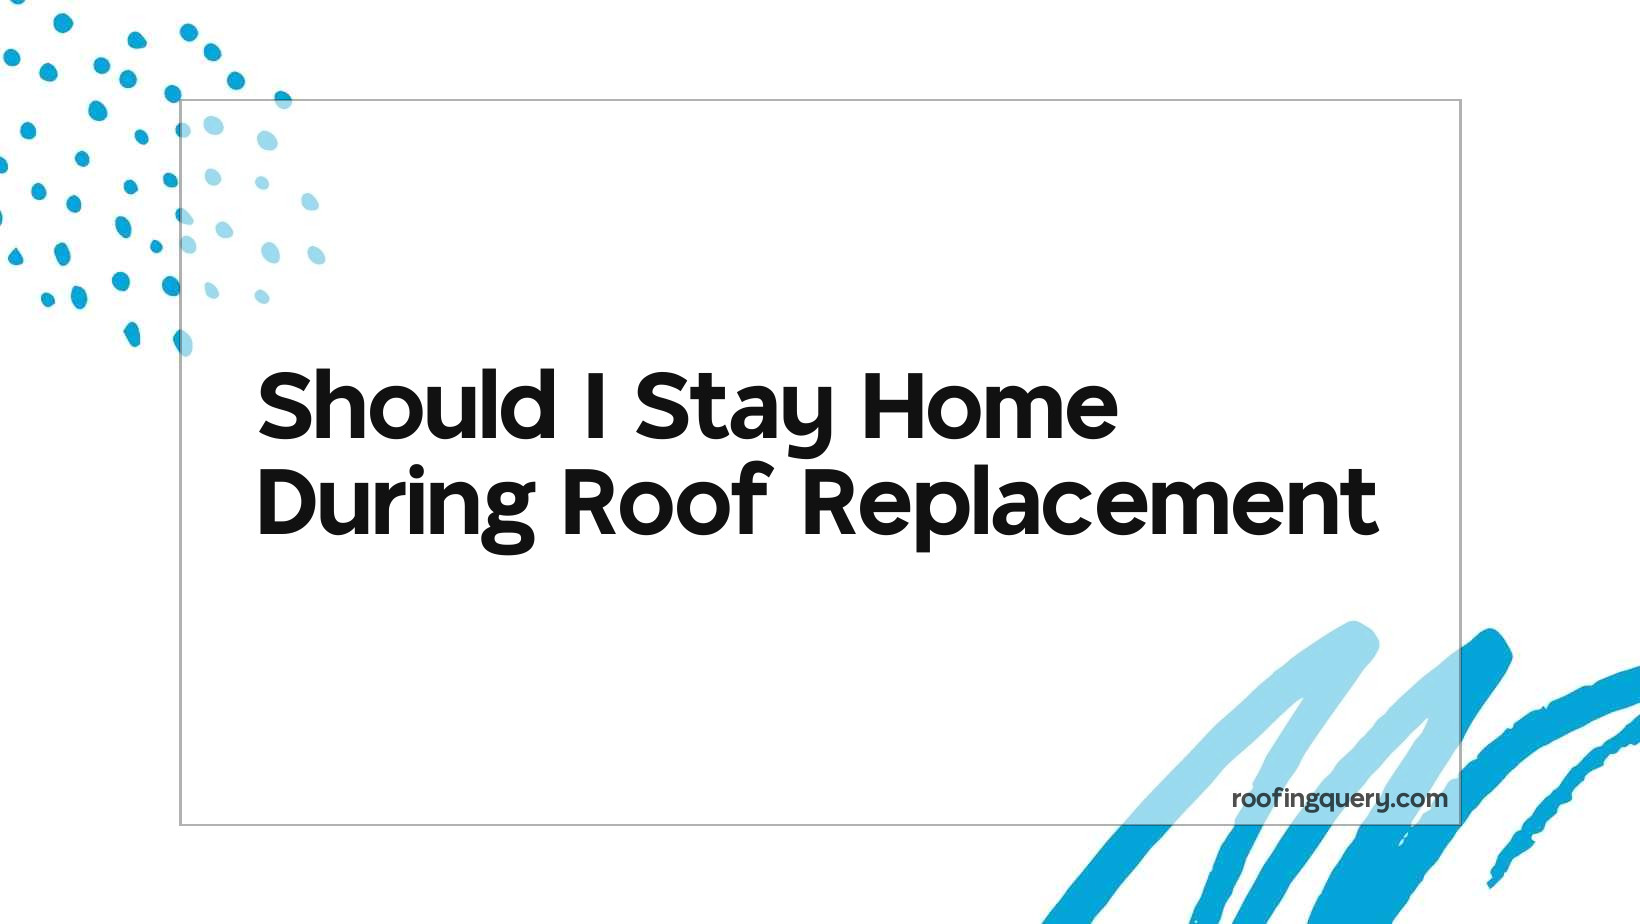 Should I Stay Home During Roof Replacement